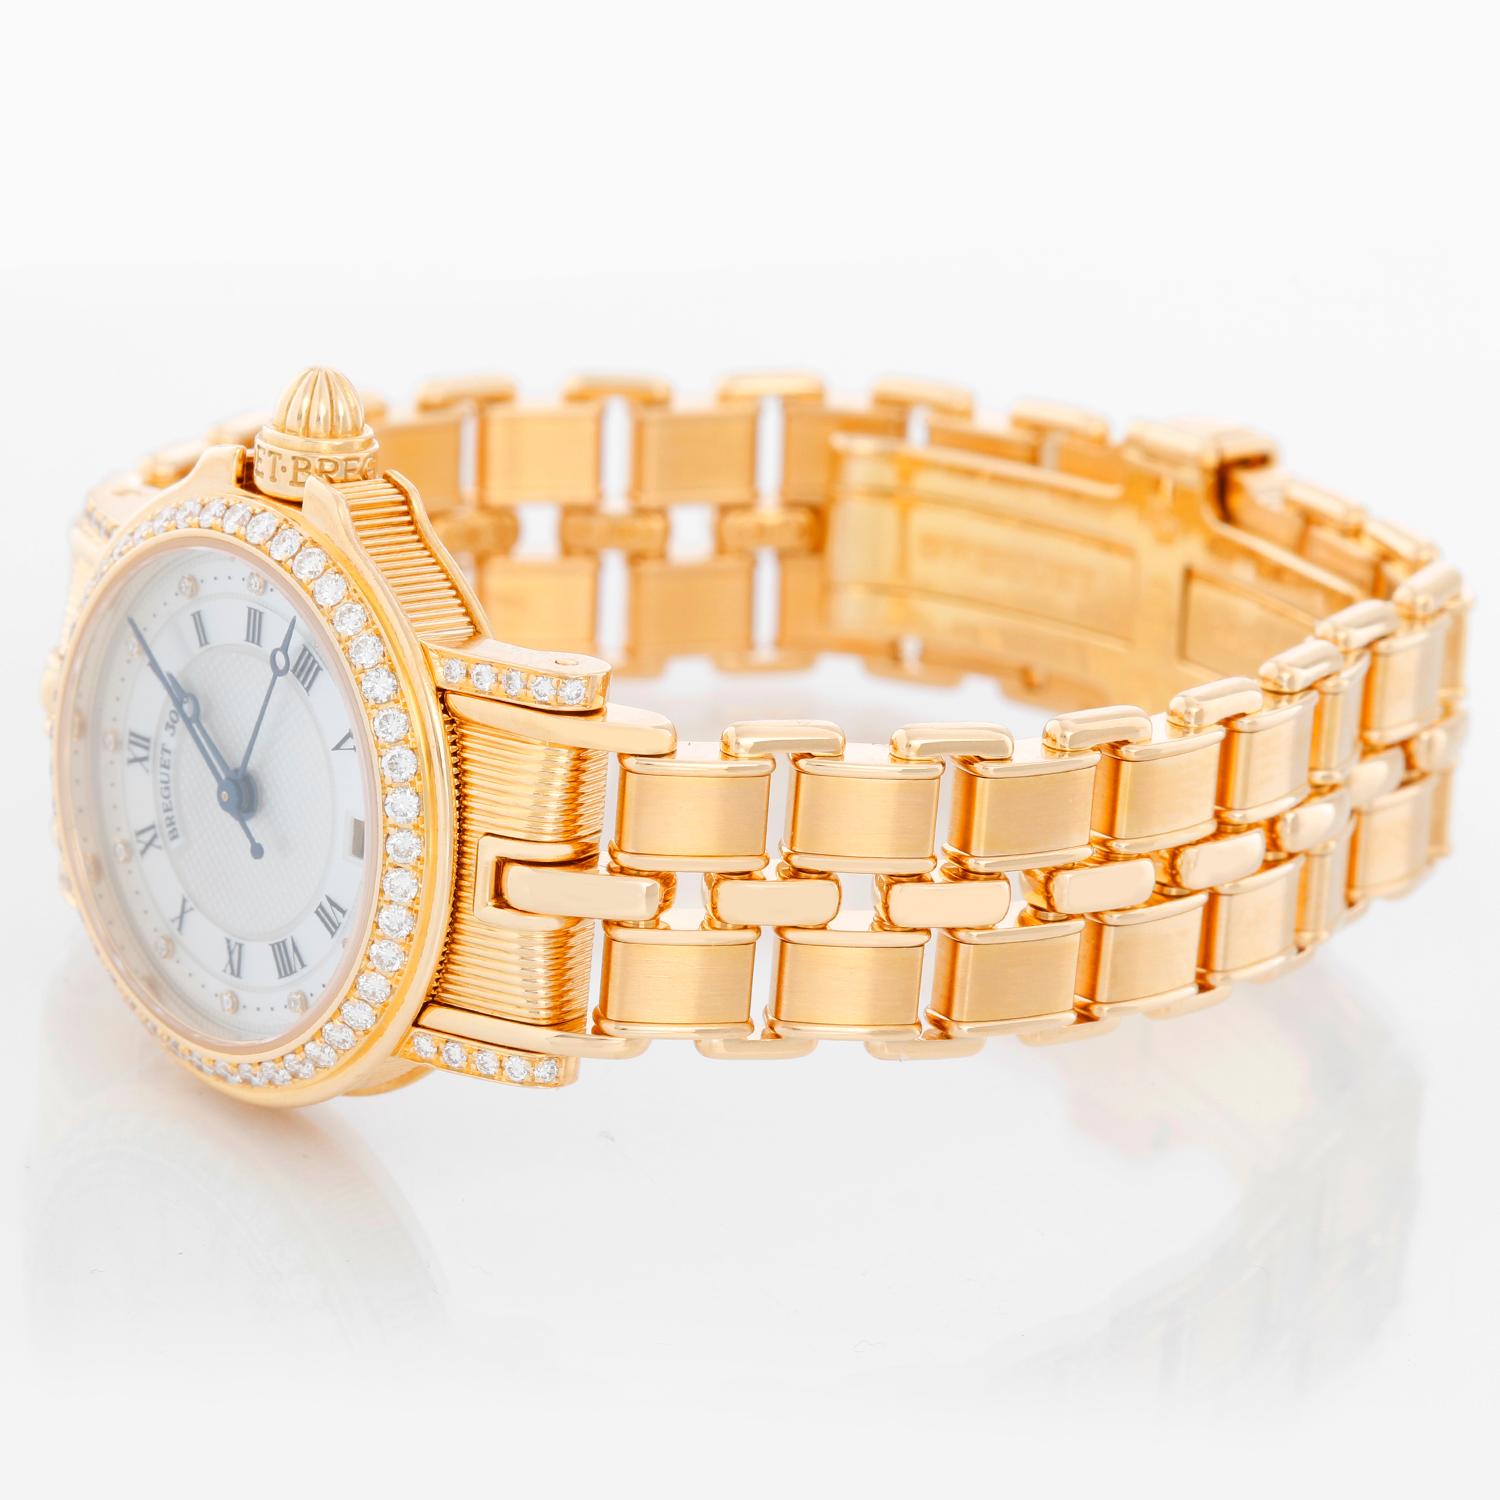 Breguet Marine Automatic Ladies 18k Yellow Gold Watch 8401BA/52/A40.DD00 - Automatic winding. 18 yellow gold case with diamond bezel and diamond lugs (26mm diameter). Mother of Pearl dial with a Roman numerals. 18K yellow gold Breguet bracelet